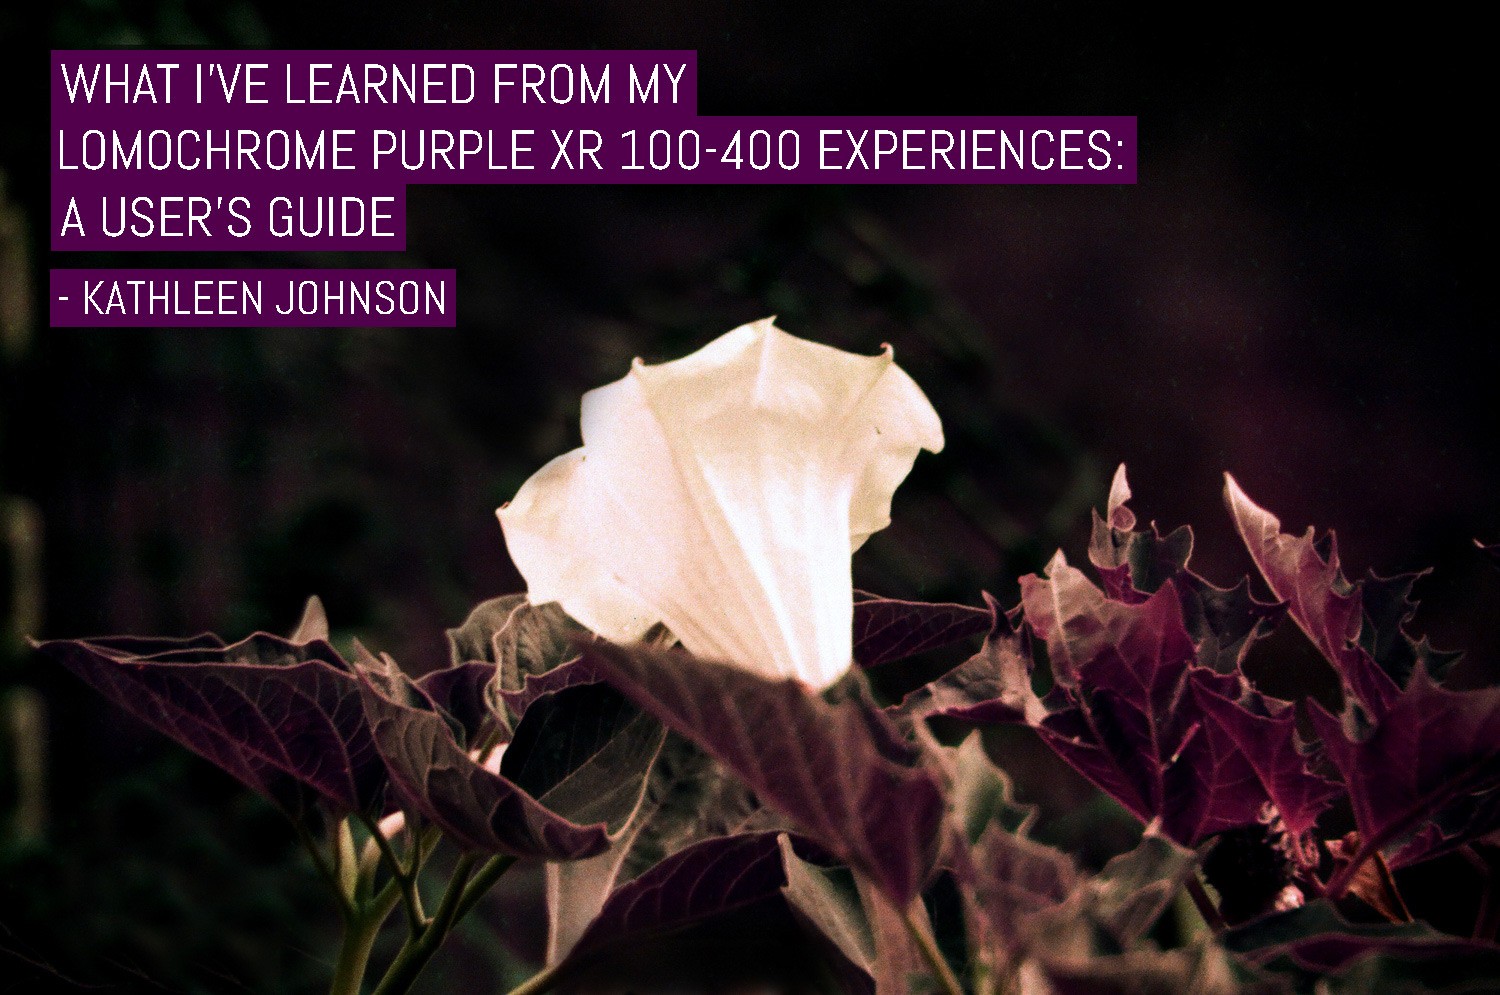 What I've learned from my LomoChrome Purple XR 100-400 experiences: A user's guide